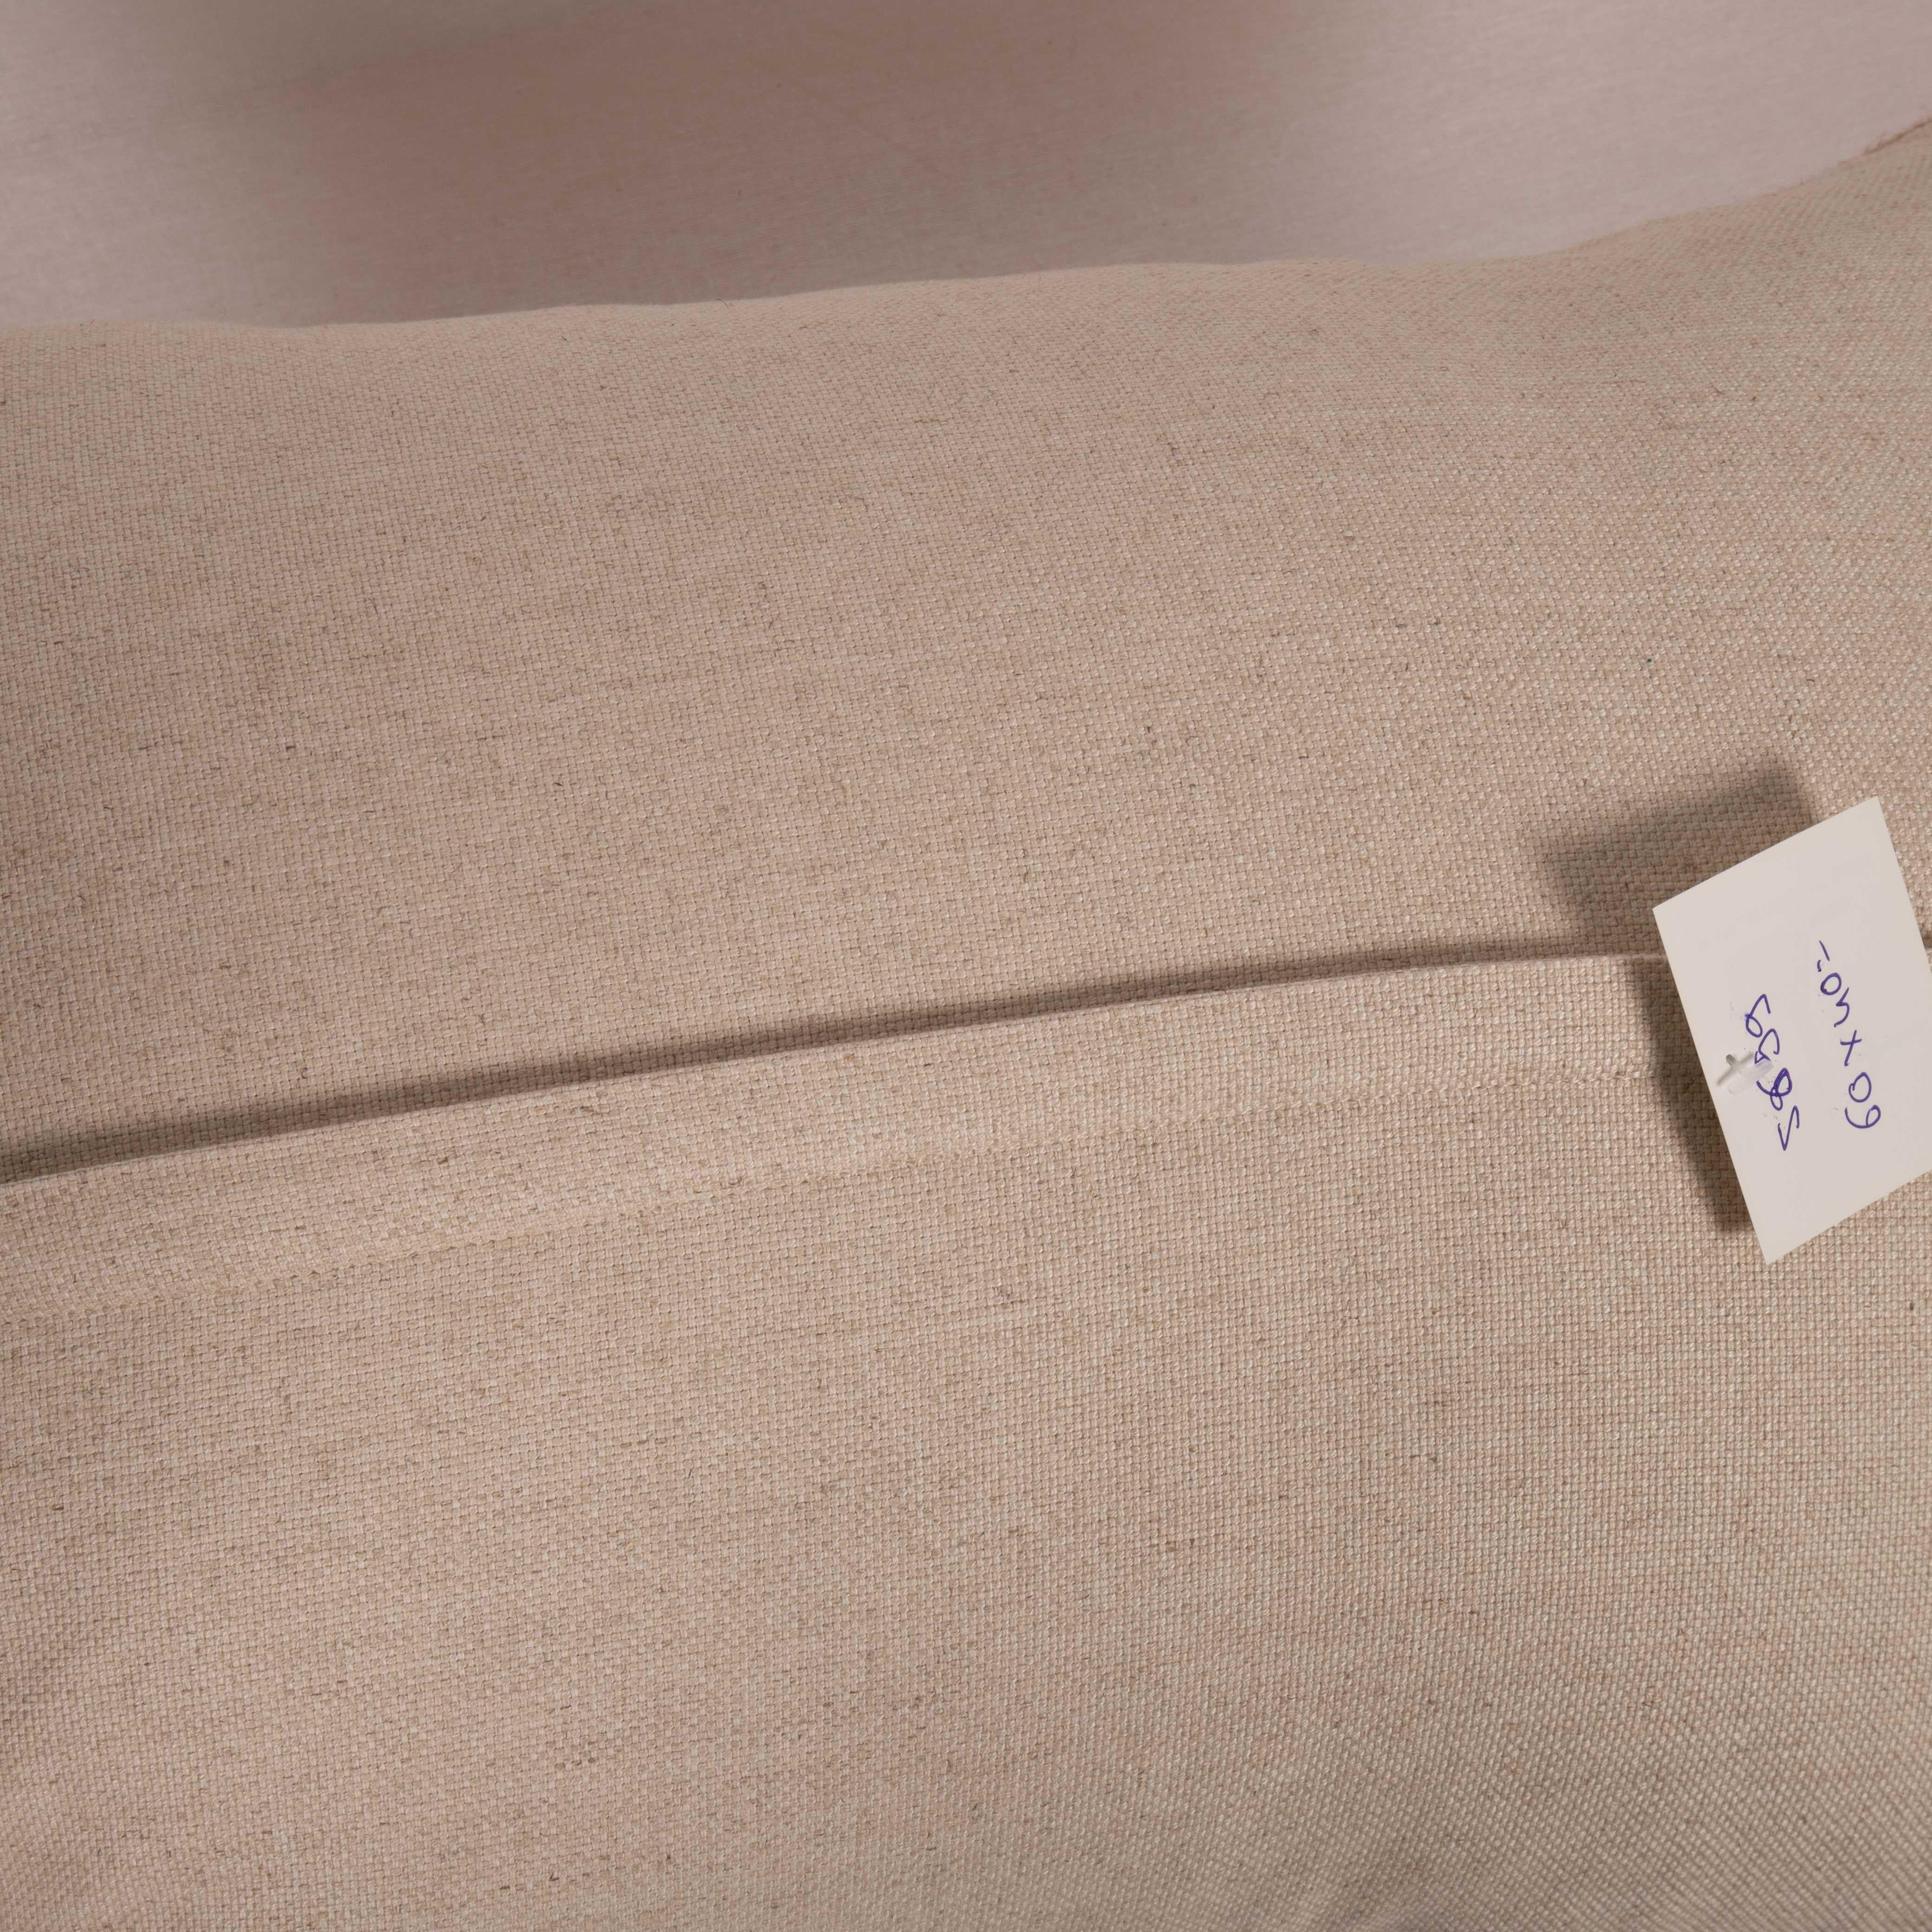 20th Century Neutral Pillow Case Made from a Vintage Wool Cover, Mid-20th C For Sale